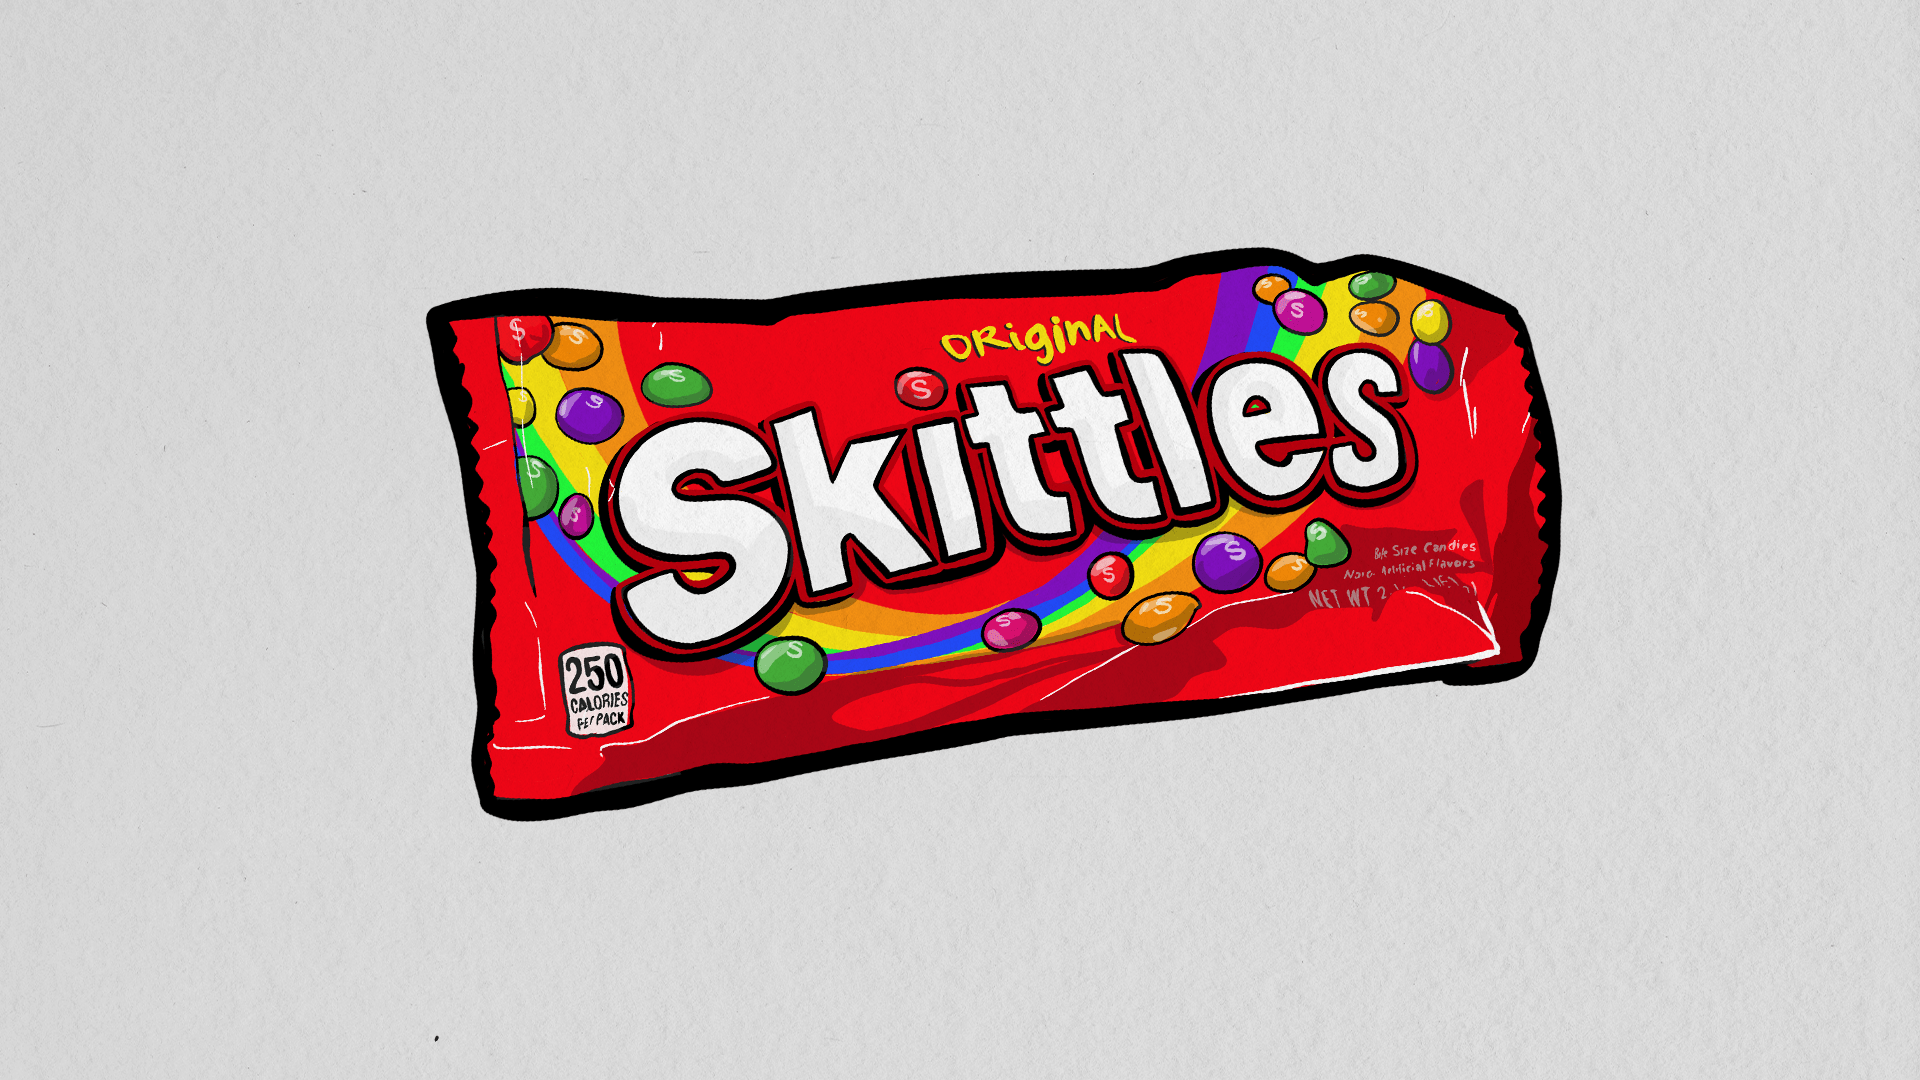 CandyisDandy_Drawings_0003_Skittles-min.png